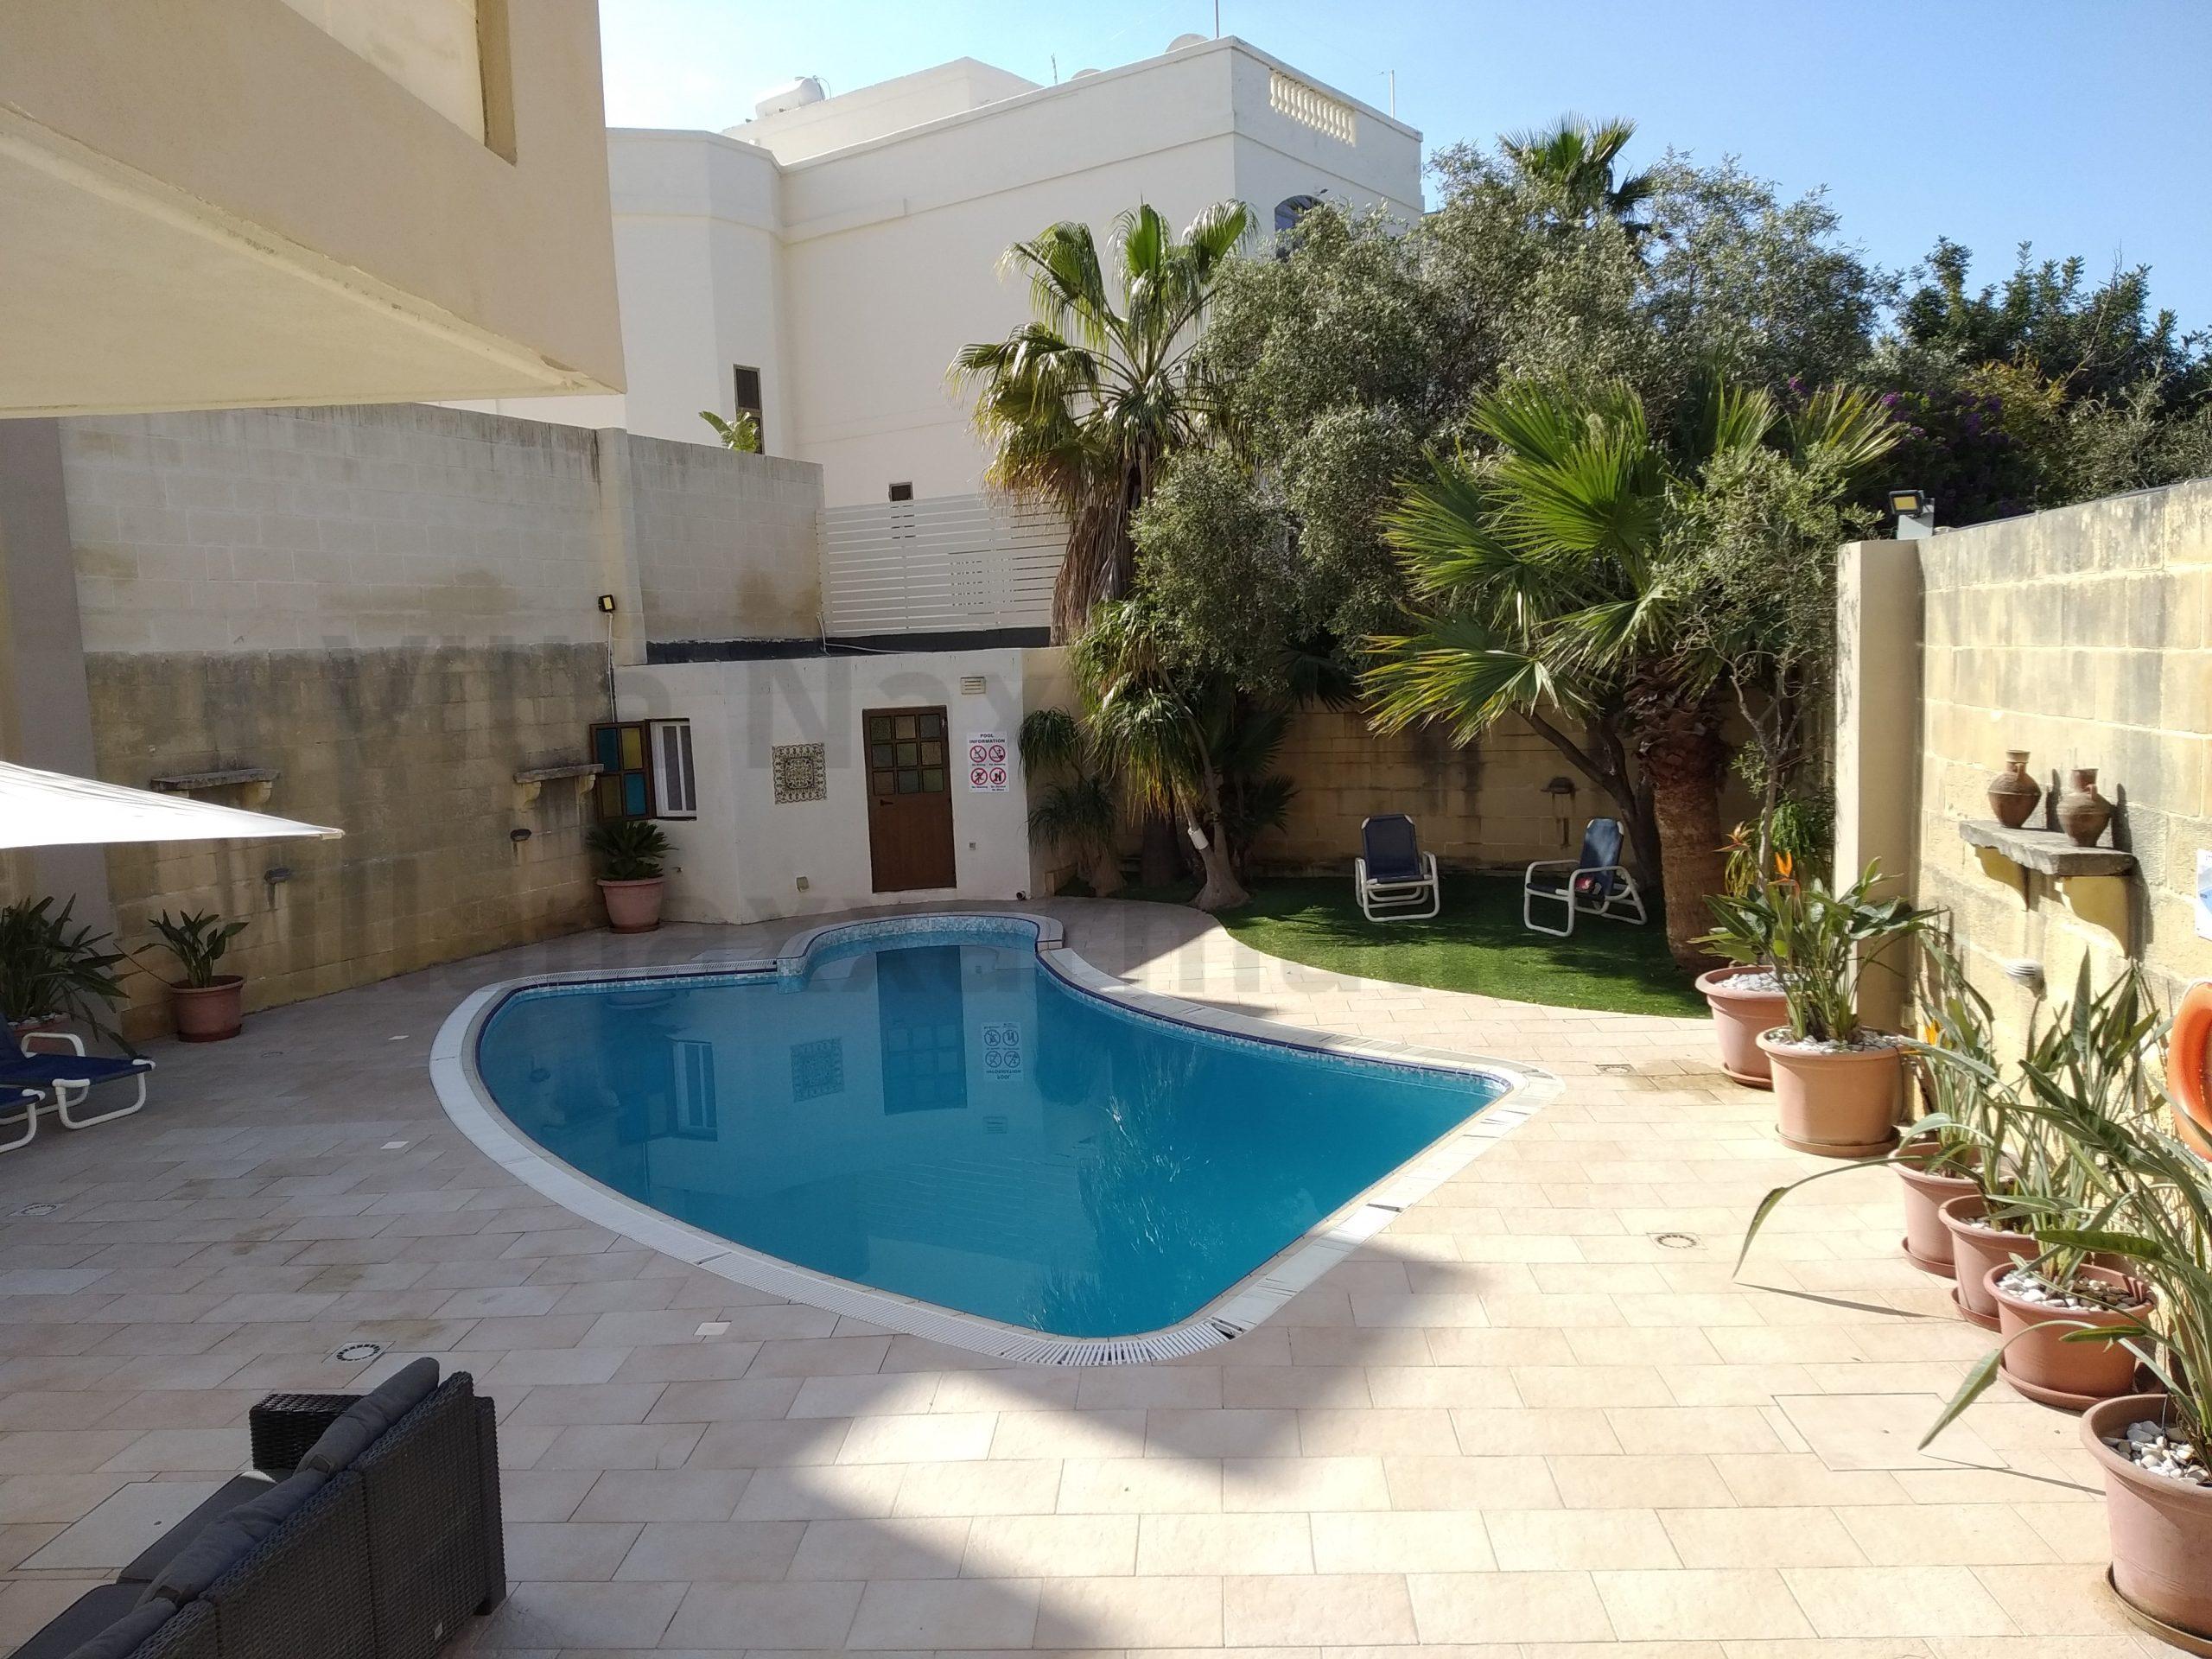 Villa Naxxar Malta - Massive outdoor areas with private pool, sunbeds, deck-chairs, very large dining and seating areas, BBQ, WIFI and more